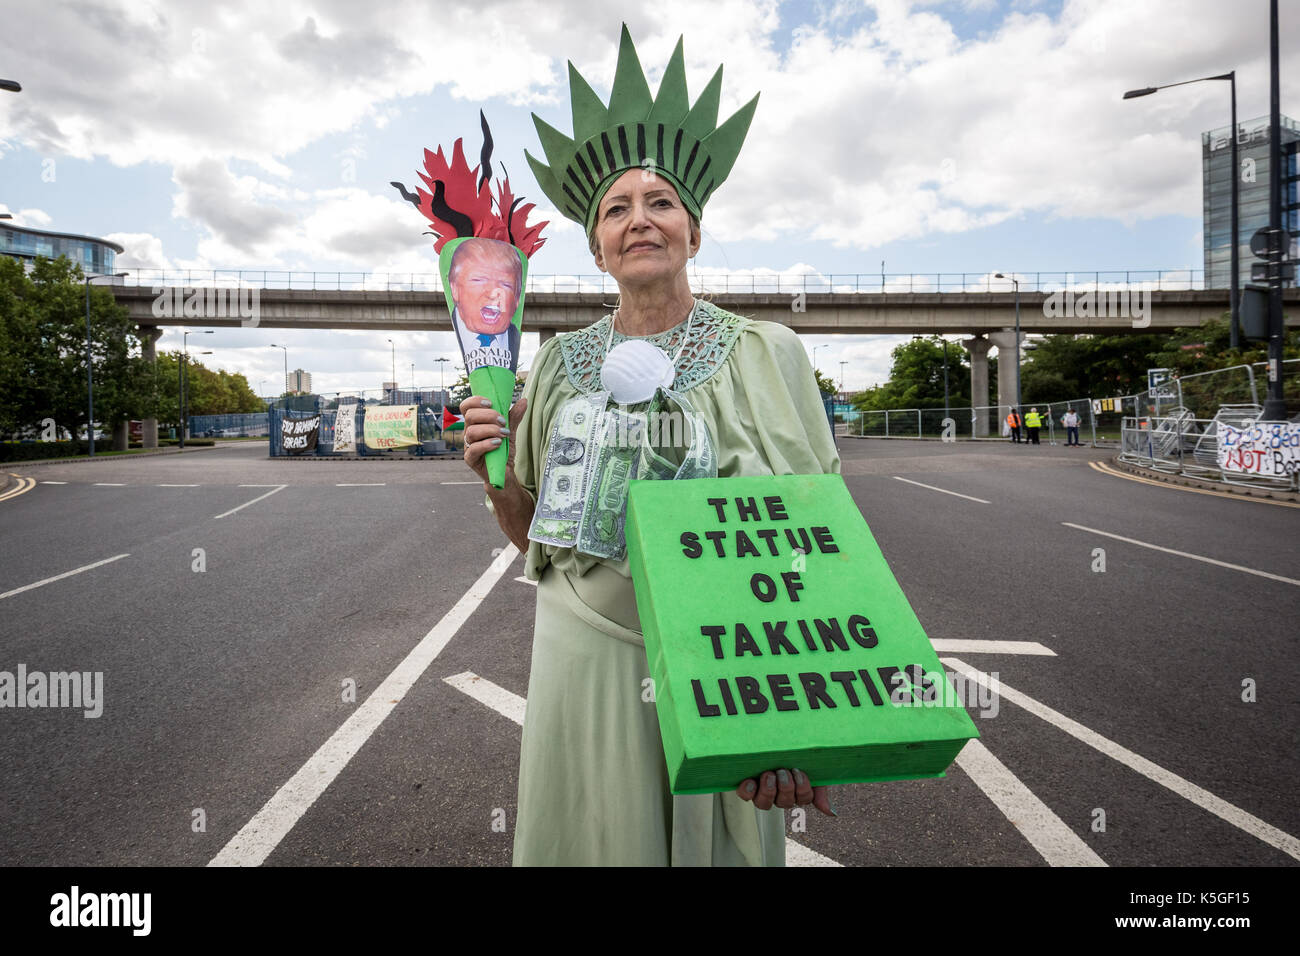 London, UK. 9th Sept, 2017. Protests continue against DSEi Arms Fair (Defence & Security Equipment International) - the world's largest biggest arm fair at Excel Centre in east London. Activist Auriel Glanville, co-ordinator of Merton Friends of the Earth, protests near the east gate entrance dressed in her creation ‘The Statue of Taking Liberties’. Credit: Guy Corbishley/Alamy Live News Stock Photo